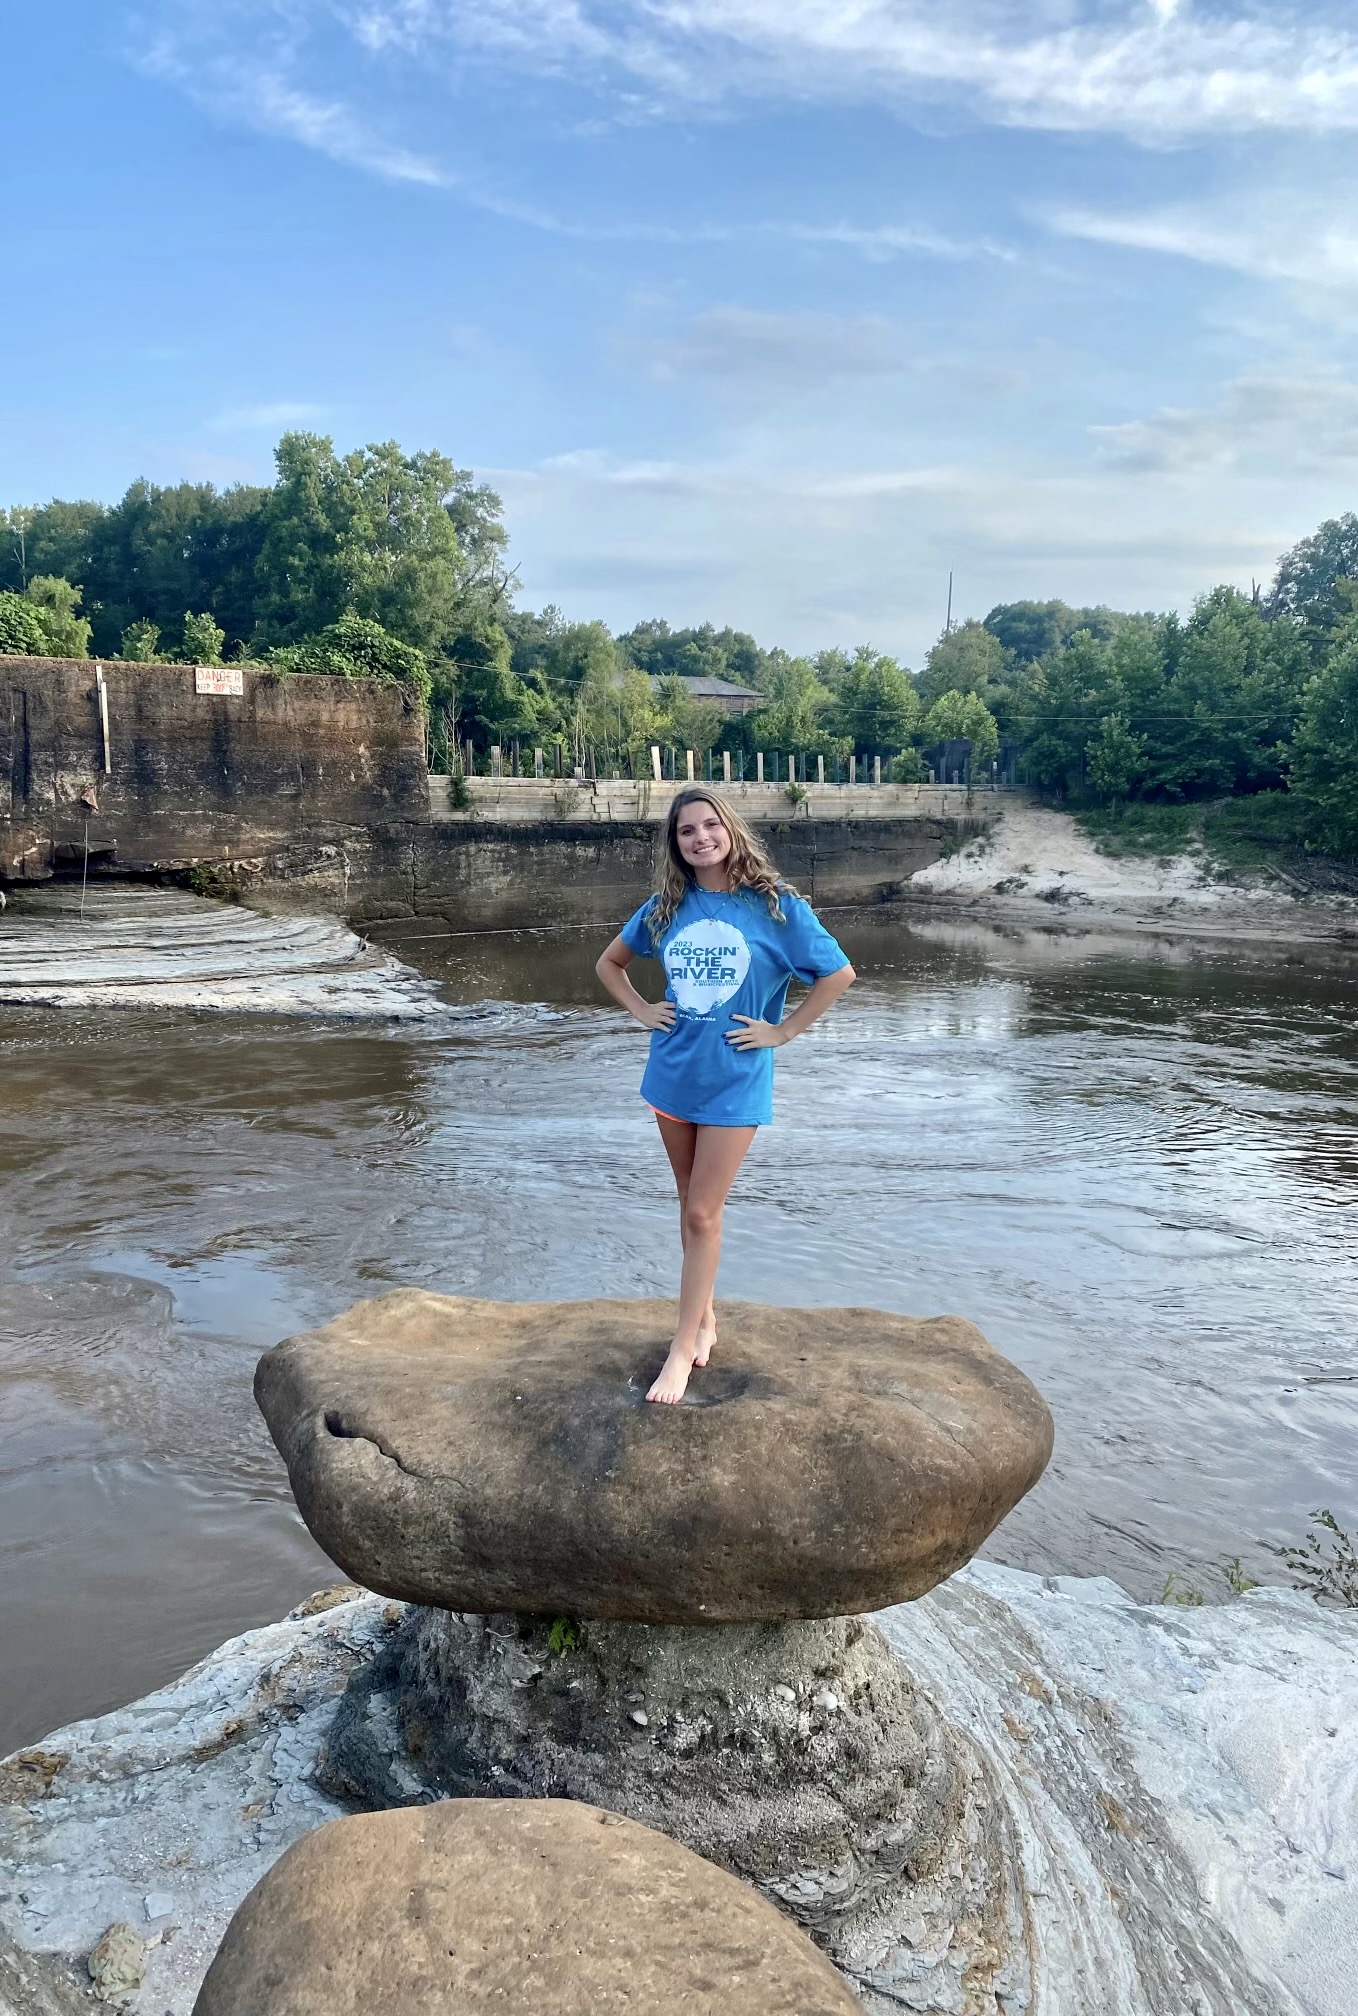 Mikailie is wearing a blue tshirt and jean shorts while standing on a rock in front of the Elba Hydroelectric Dam